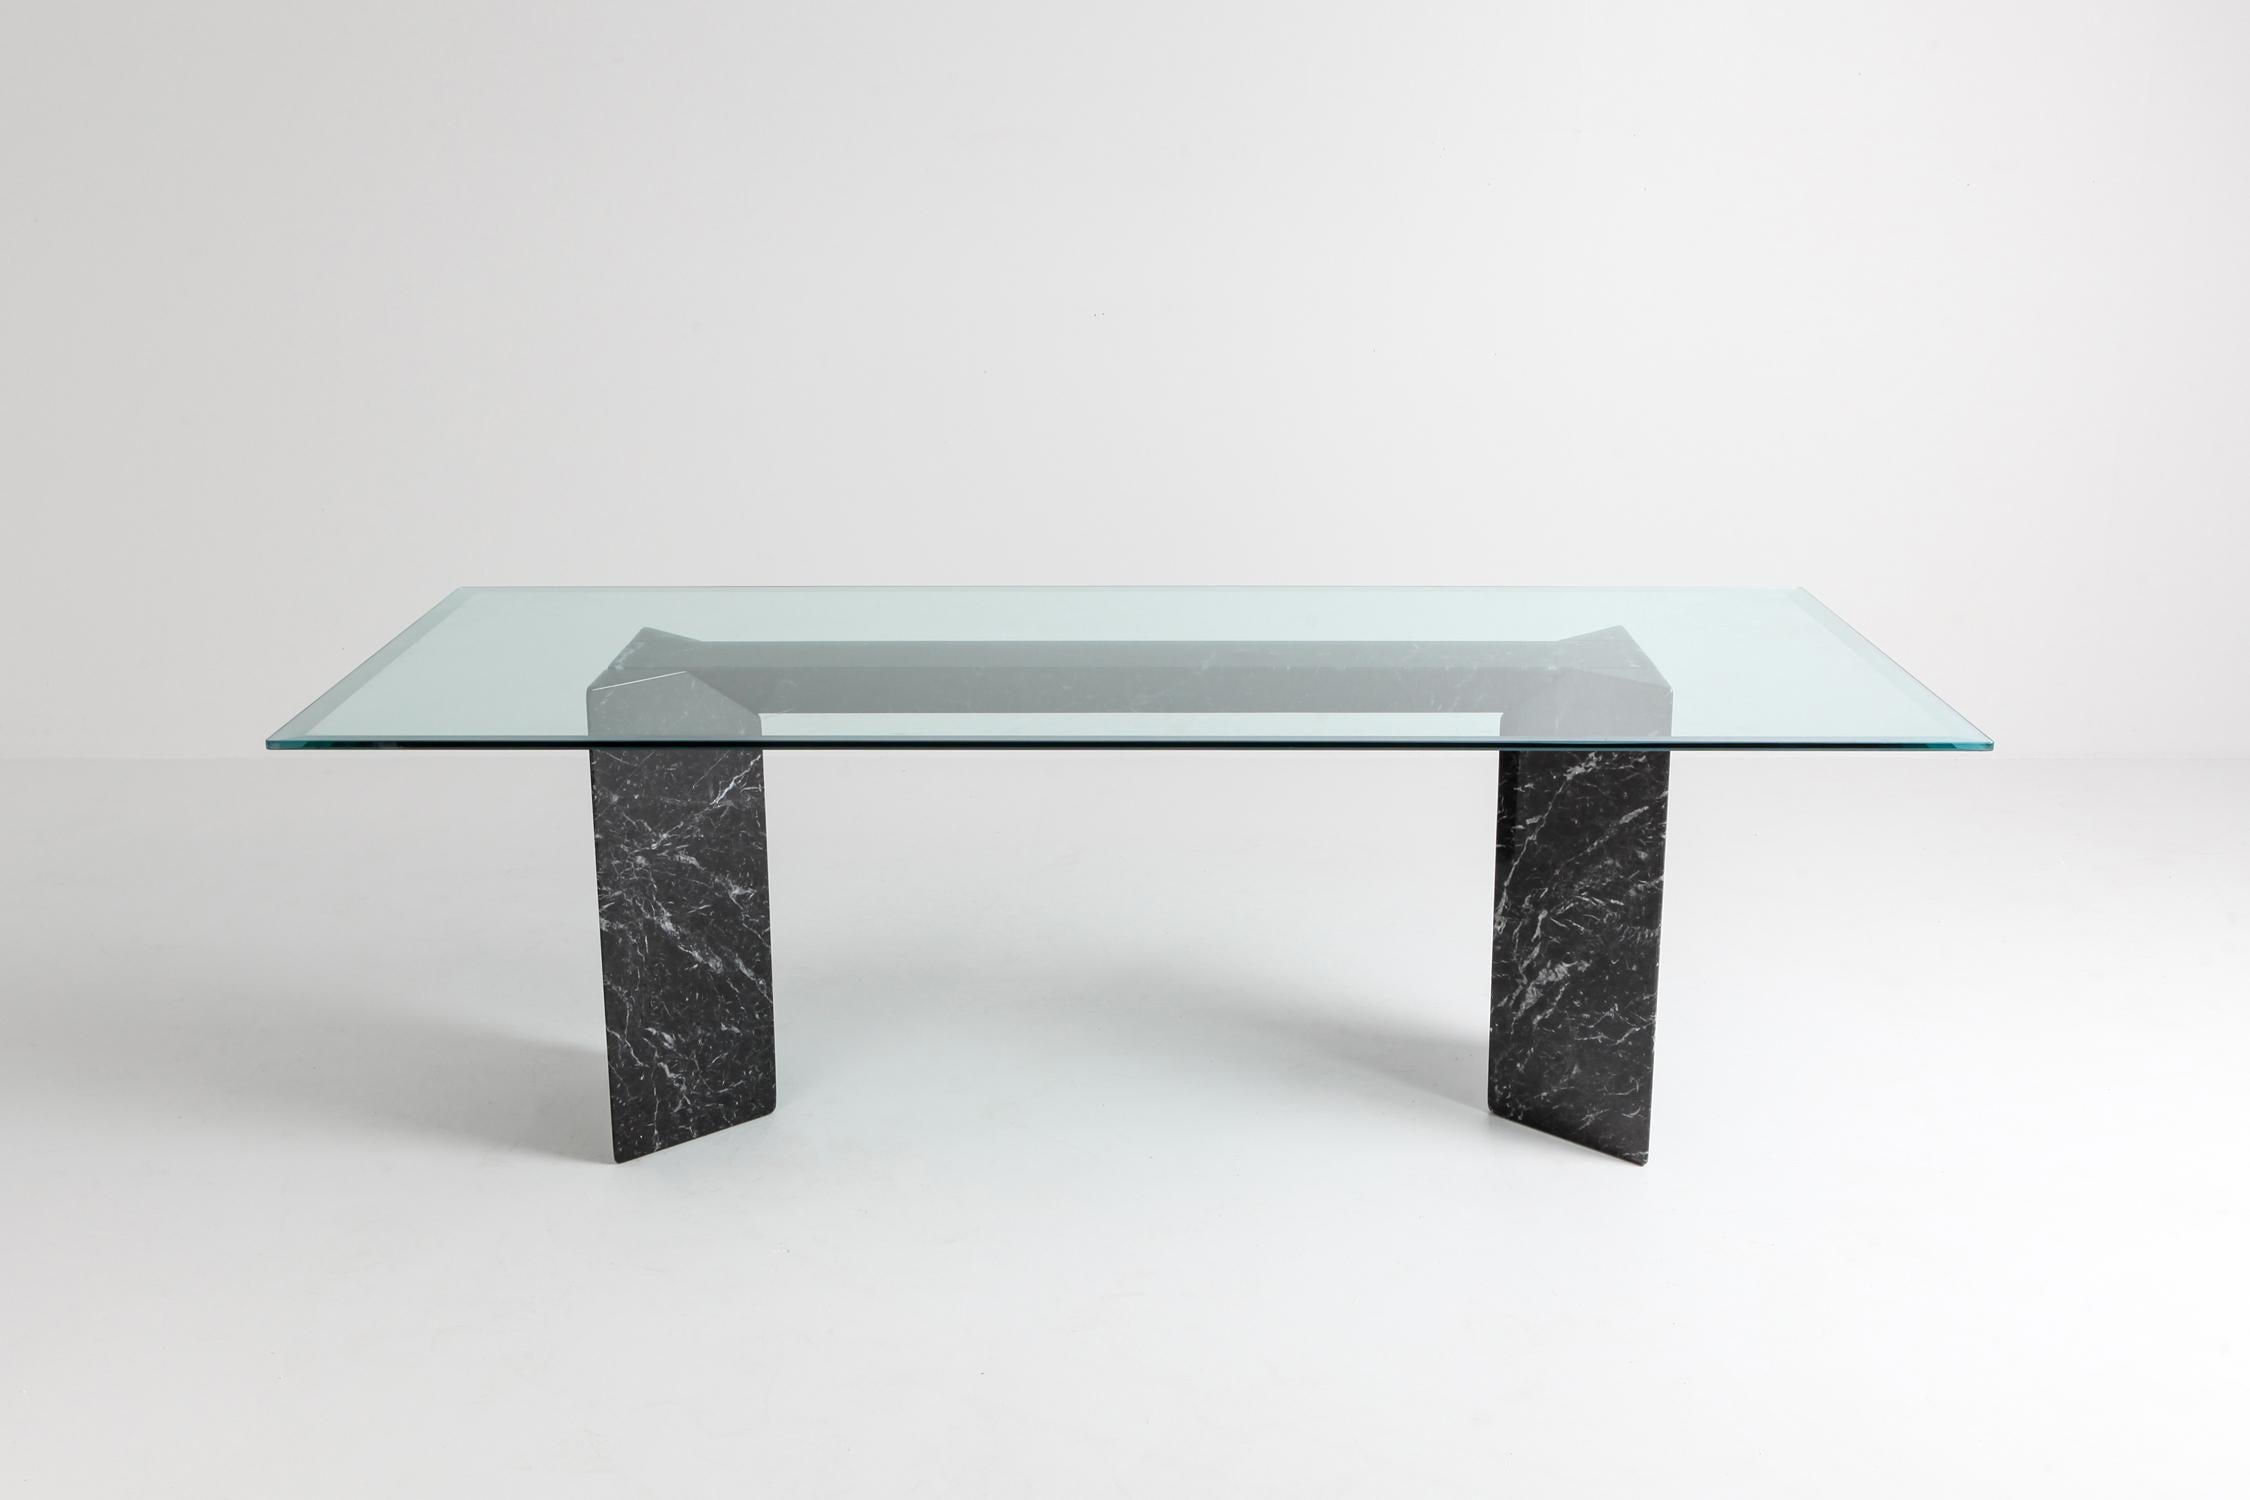 Post-modern dining table in nero Marquita marble with glass top
by Lazzotti for Up&Up
Italy, 1990s
The two marble columns can be randomly placed to support the beam.
A nice detail are the sandblasted edges on the glass top
In the style of